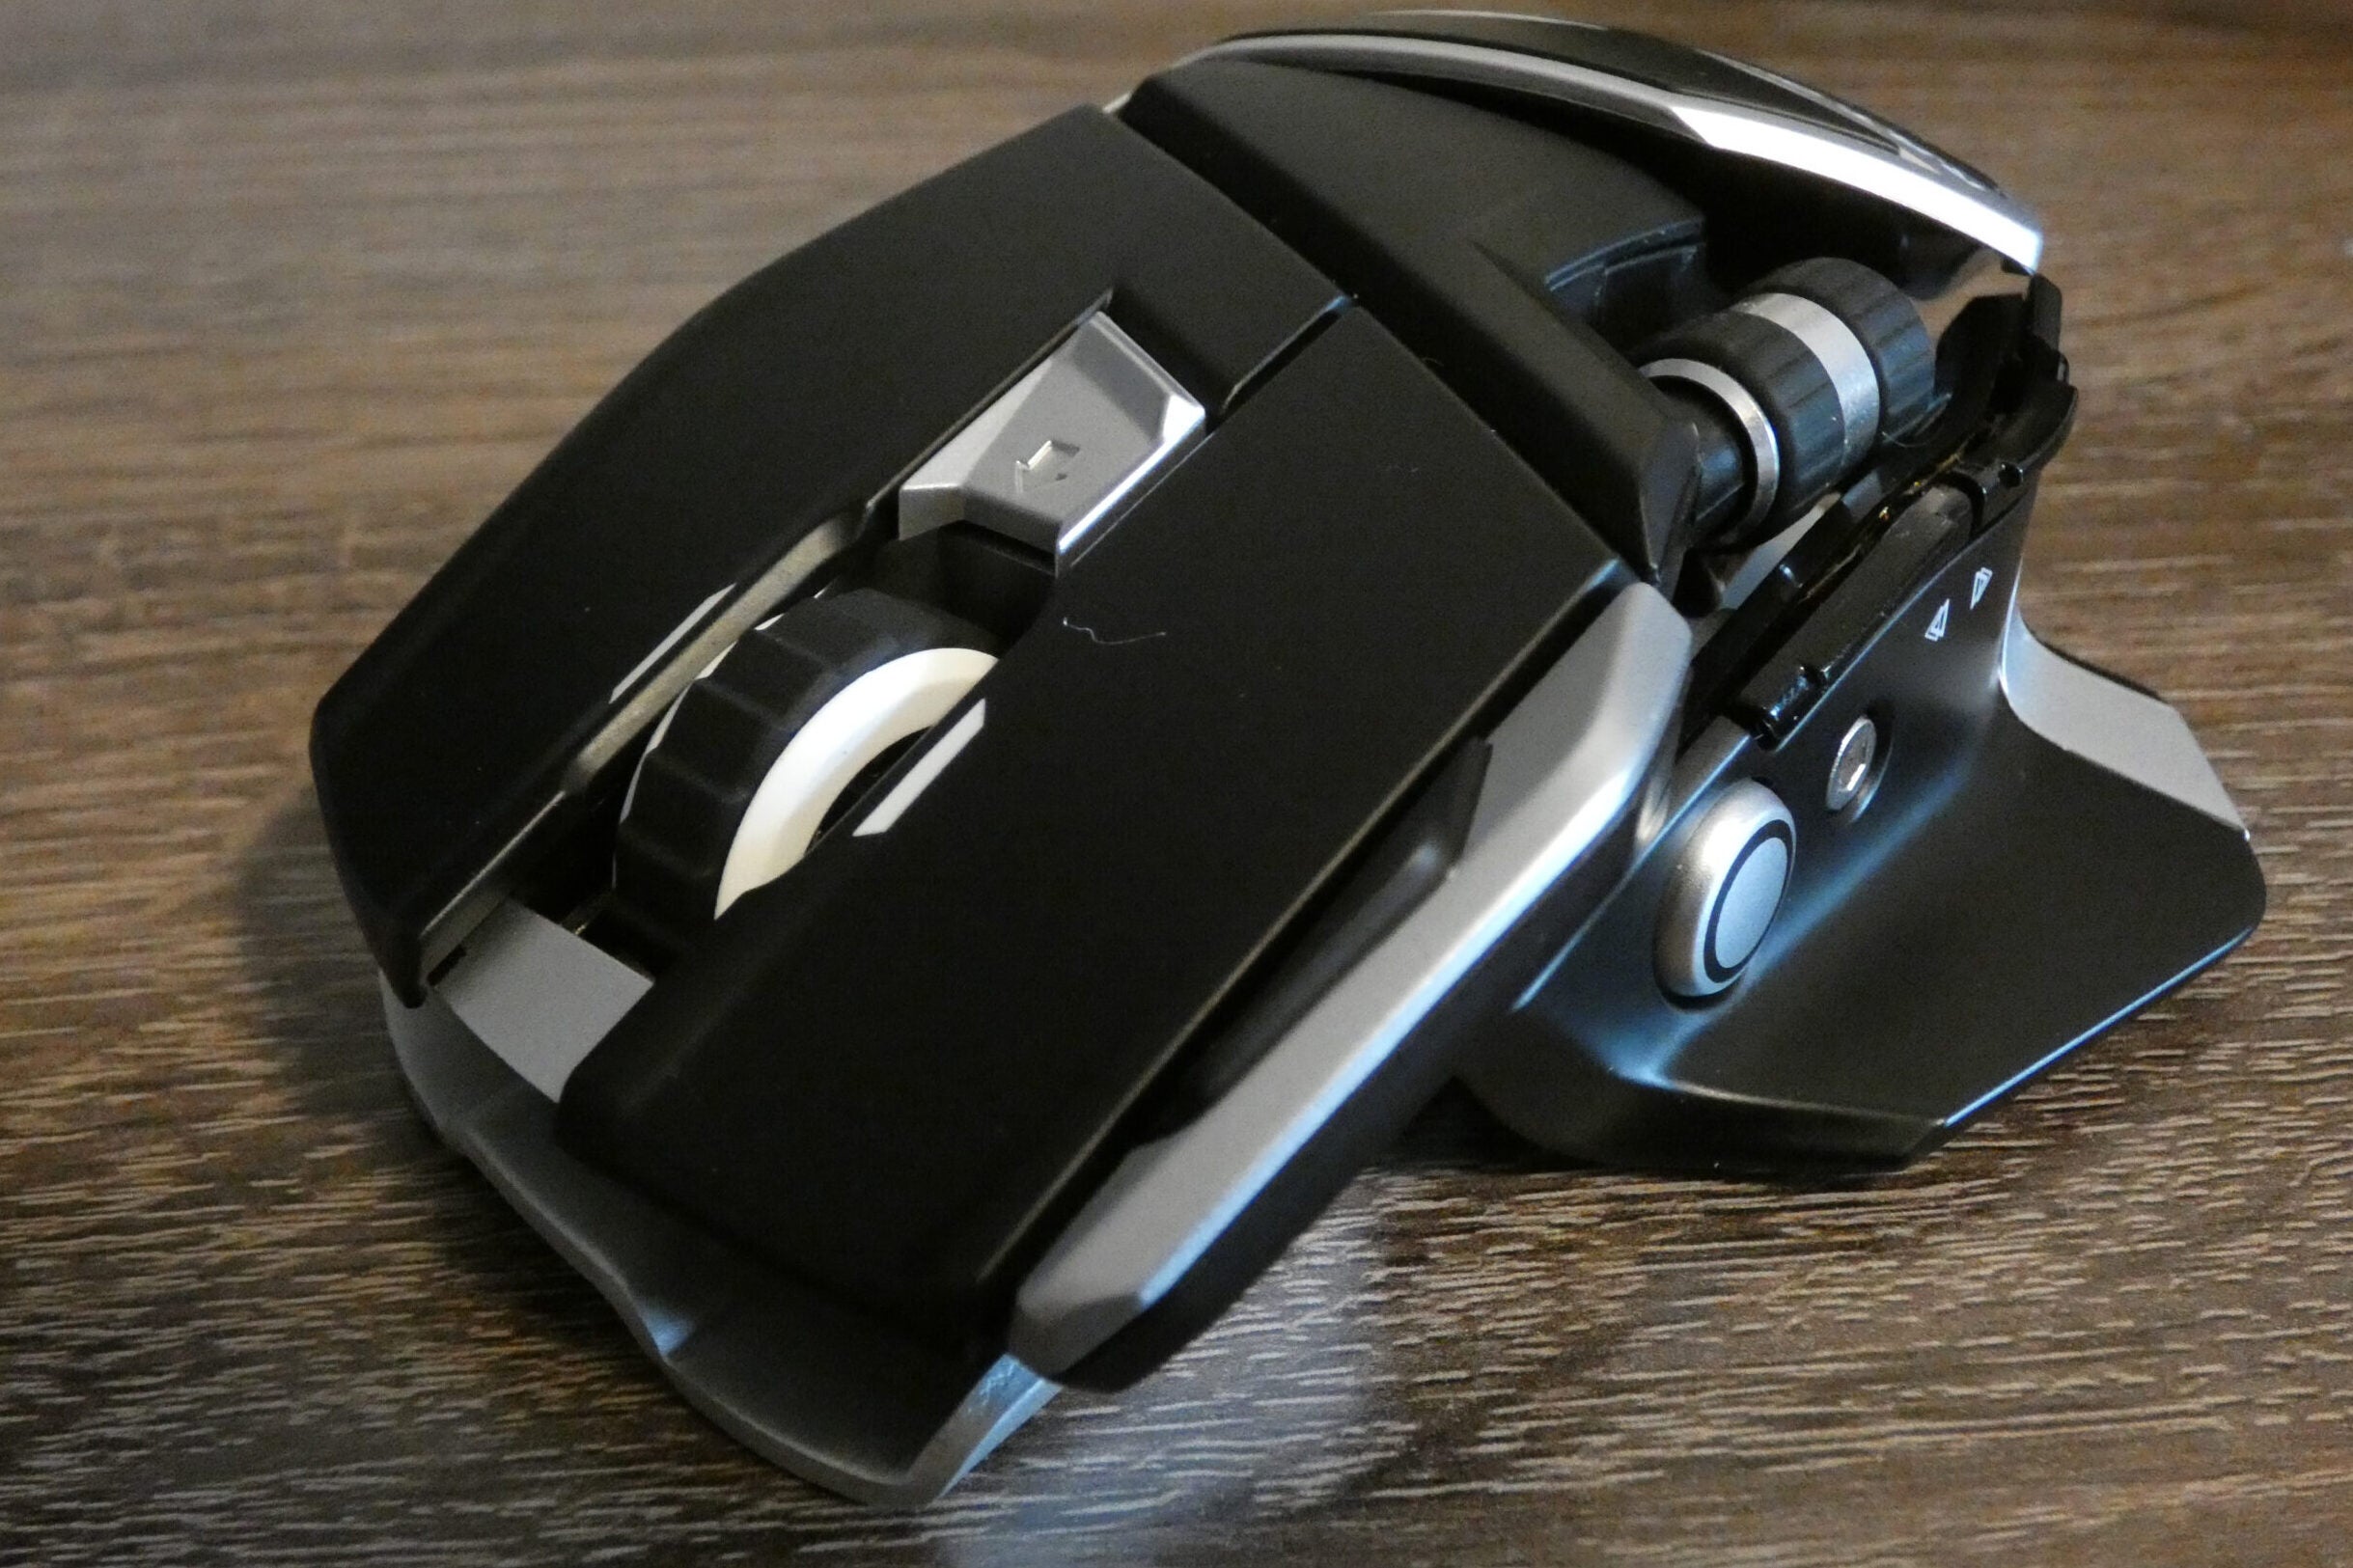 front, top and side view of gaming mouse in clear sight on table